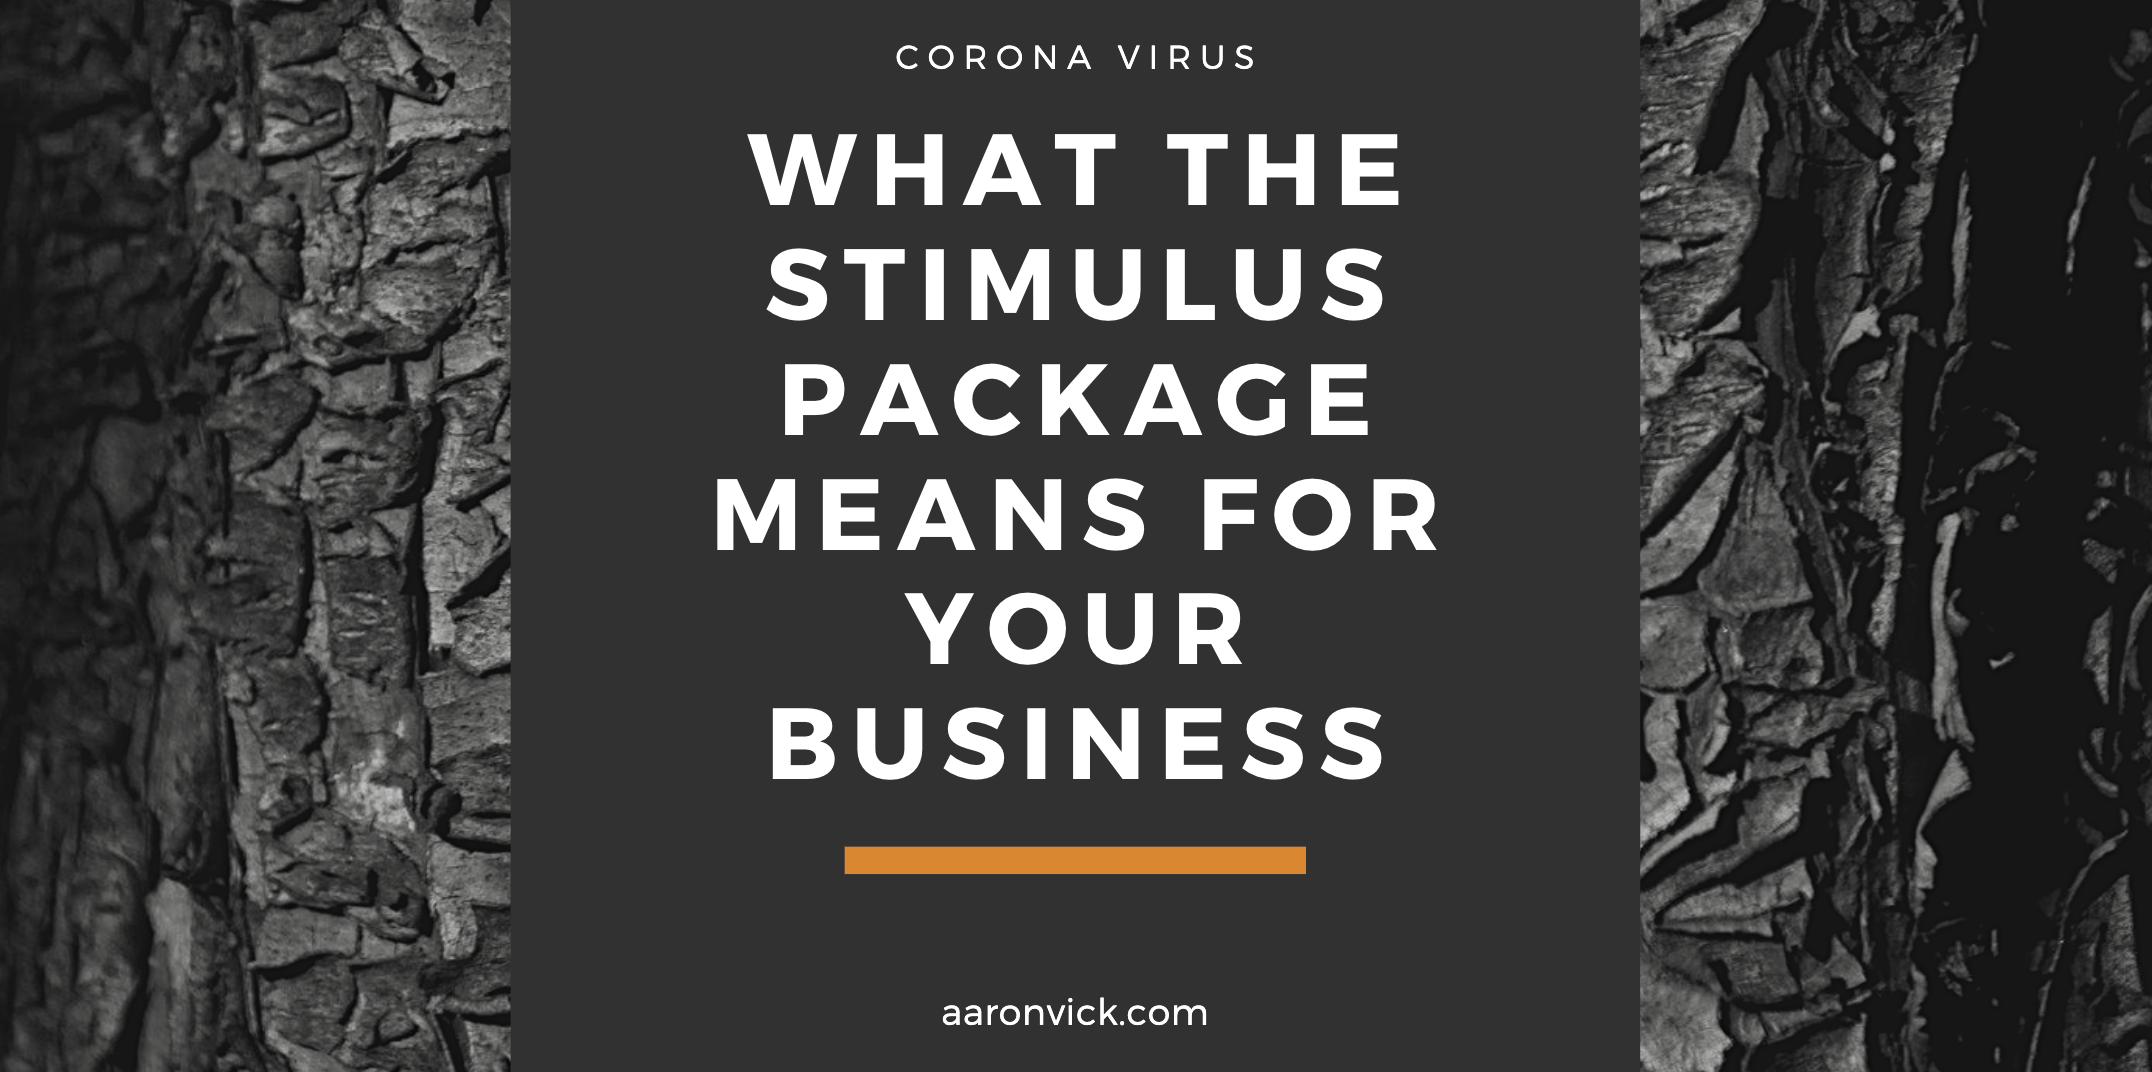 What the Stimulus Package Means for Your Business - AaronVick.com